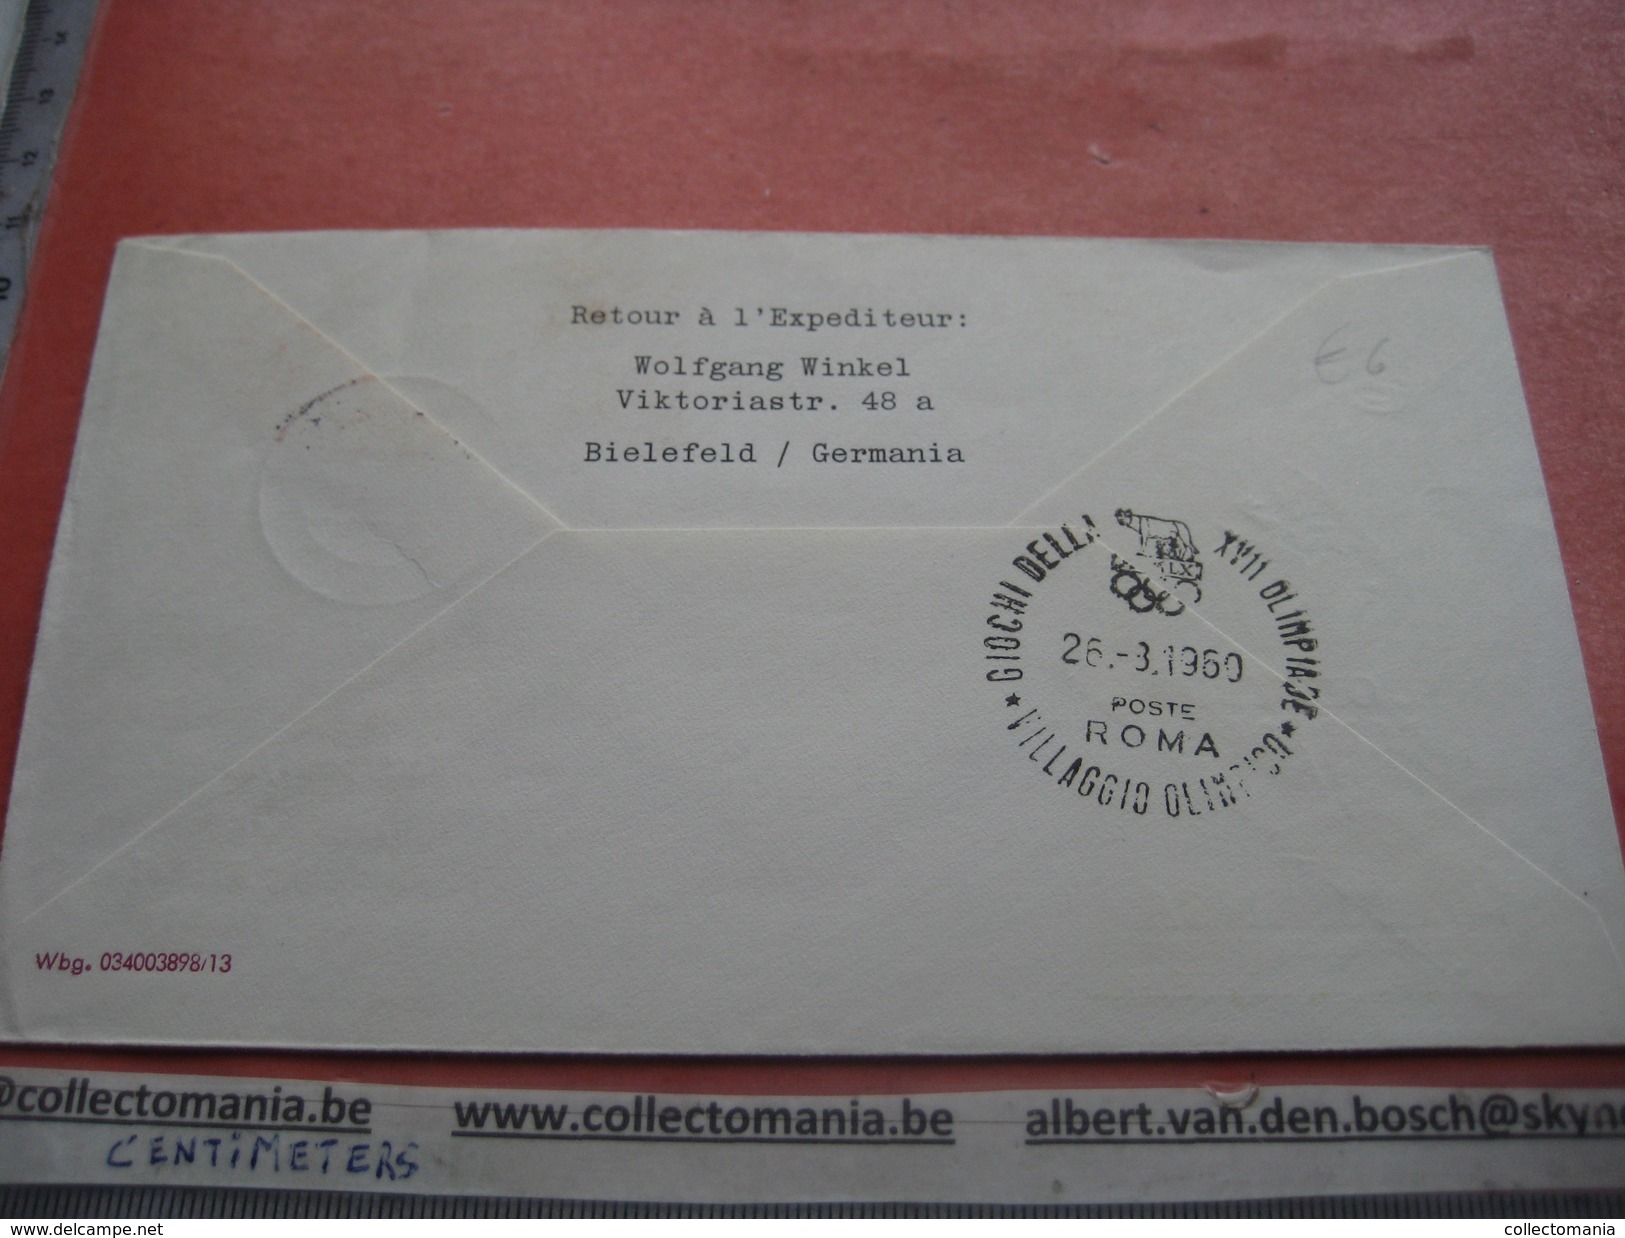 18 first day covers olympic games collection envelopes & cards jeux olympique - PREMIERE jour 1956 1960 different cachet